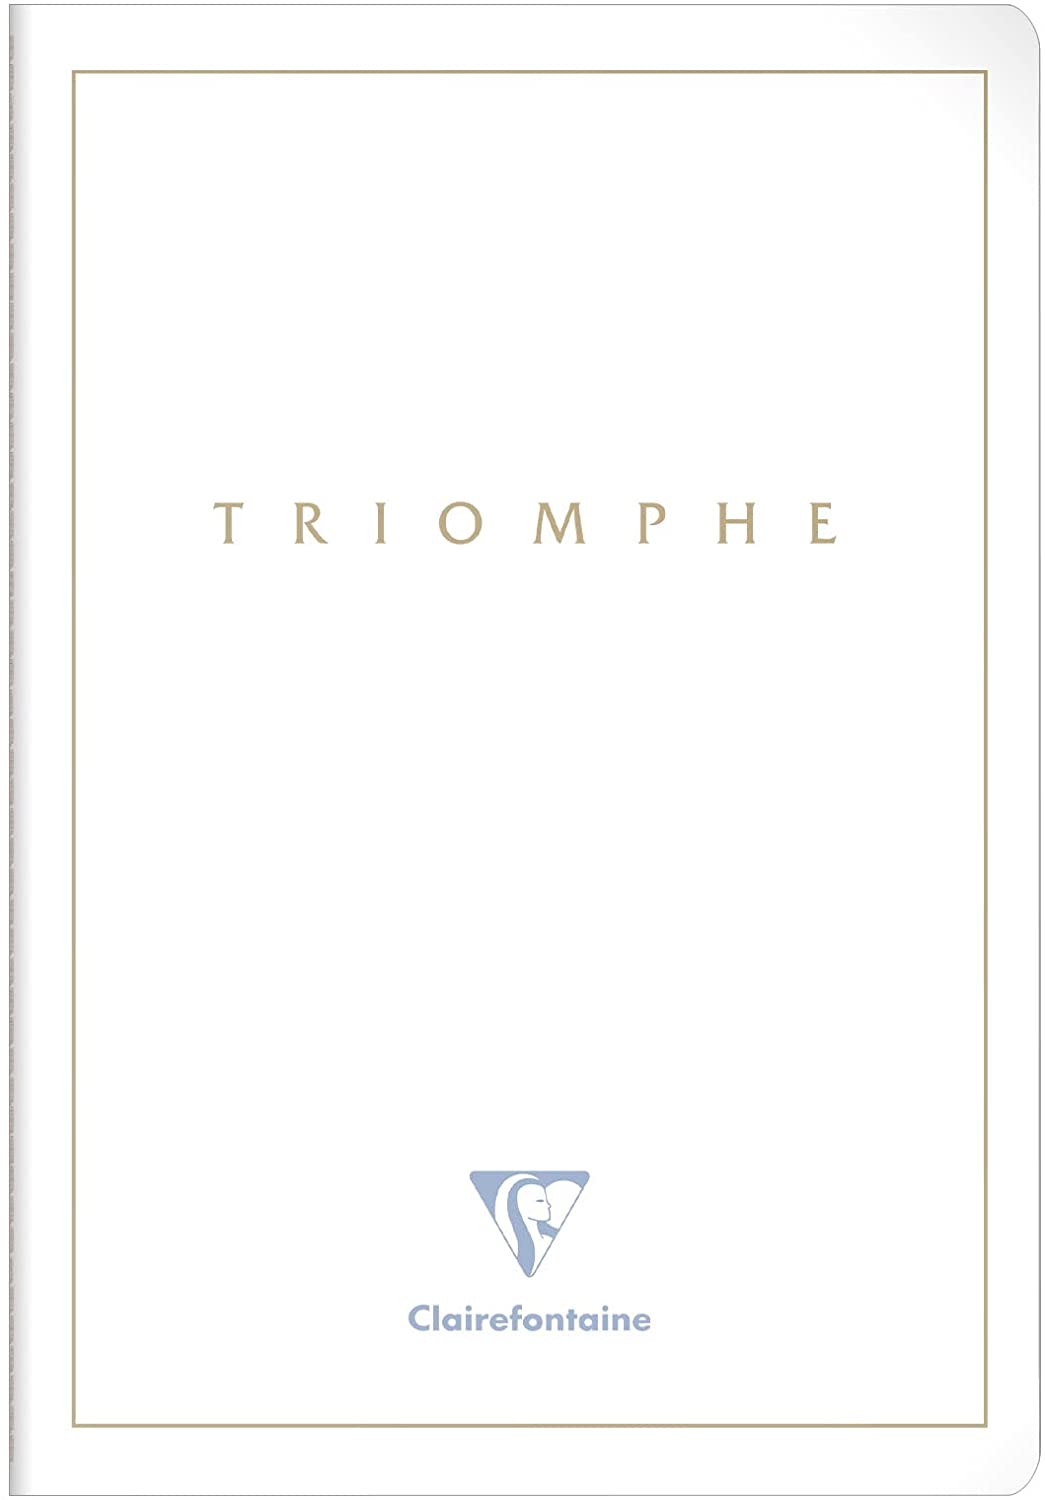 Clairefontaine Triomphe Notebook - Gold Collection